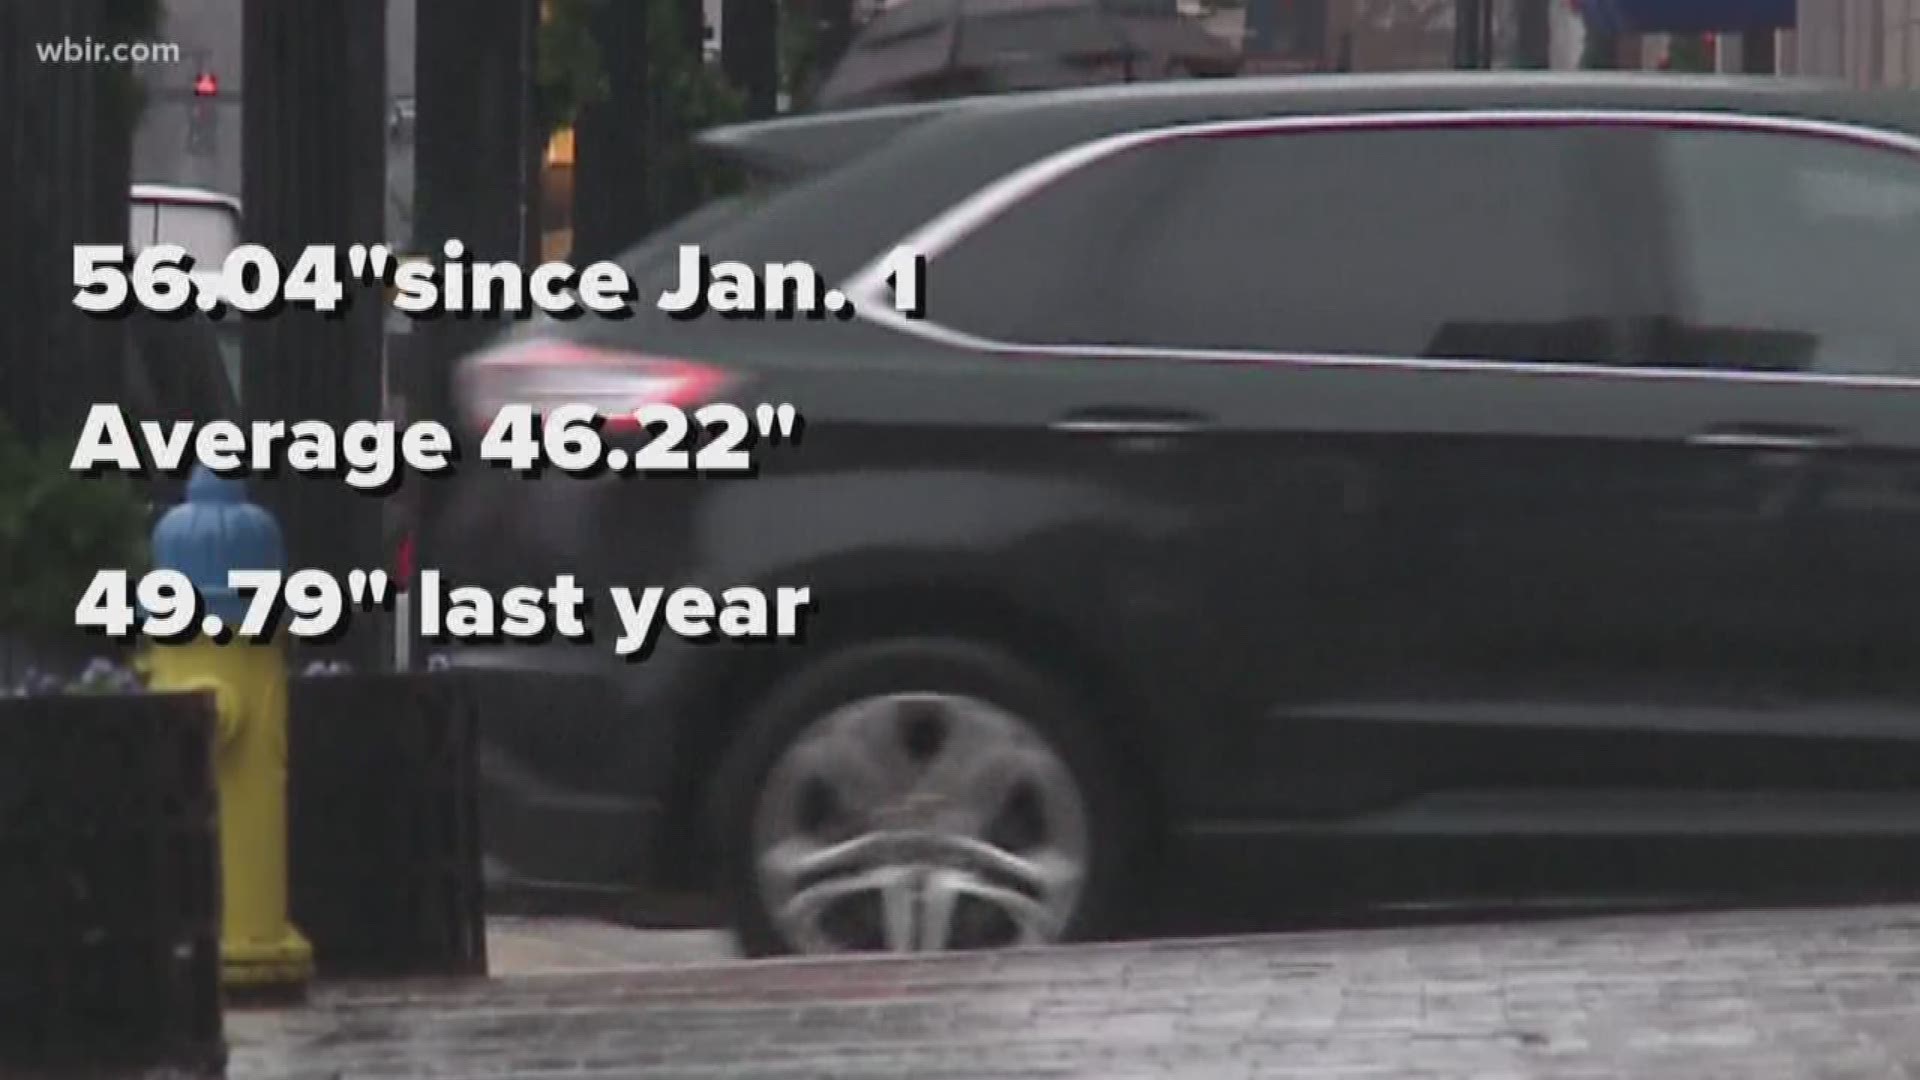 Yes, we've gotten more rain this year! Meteorologist Todd Howell explains why.